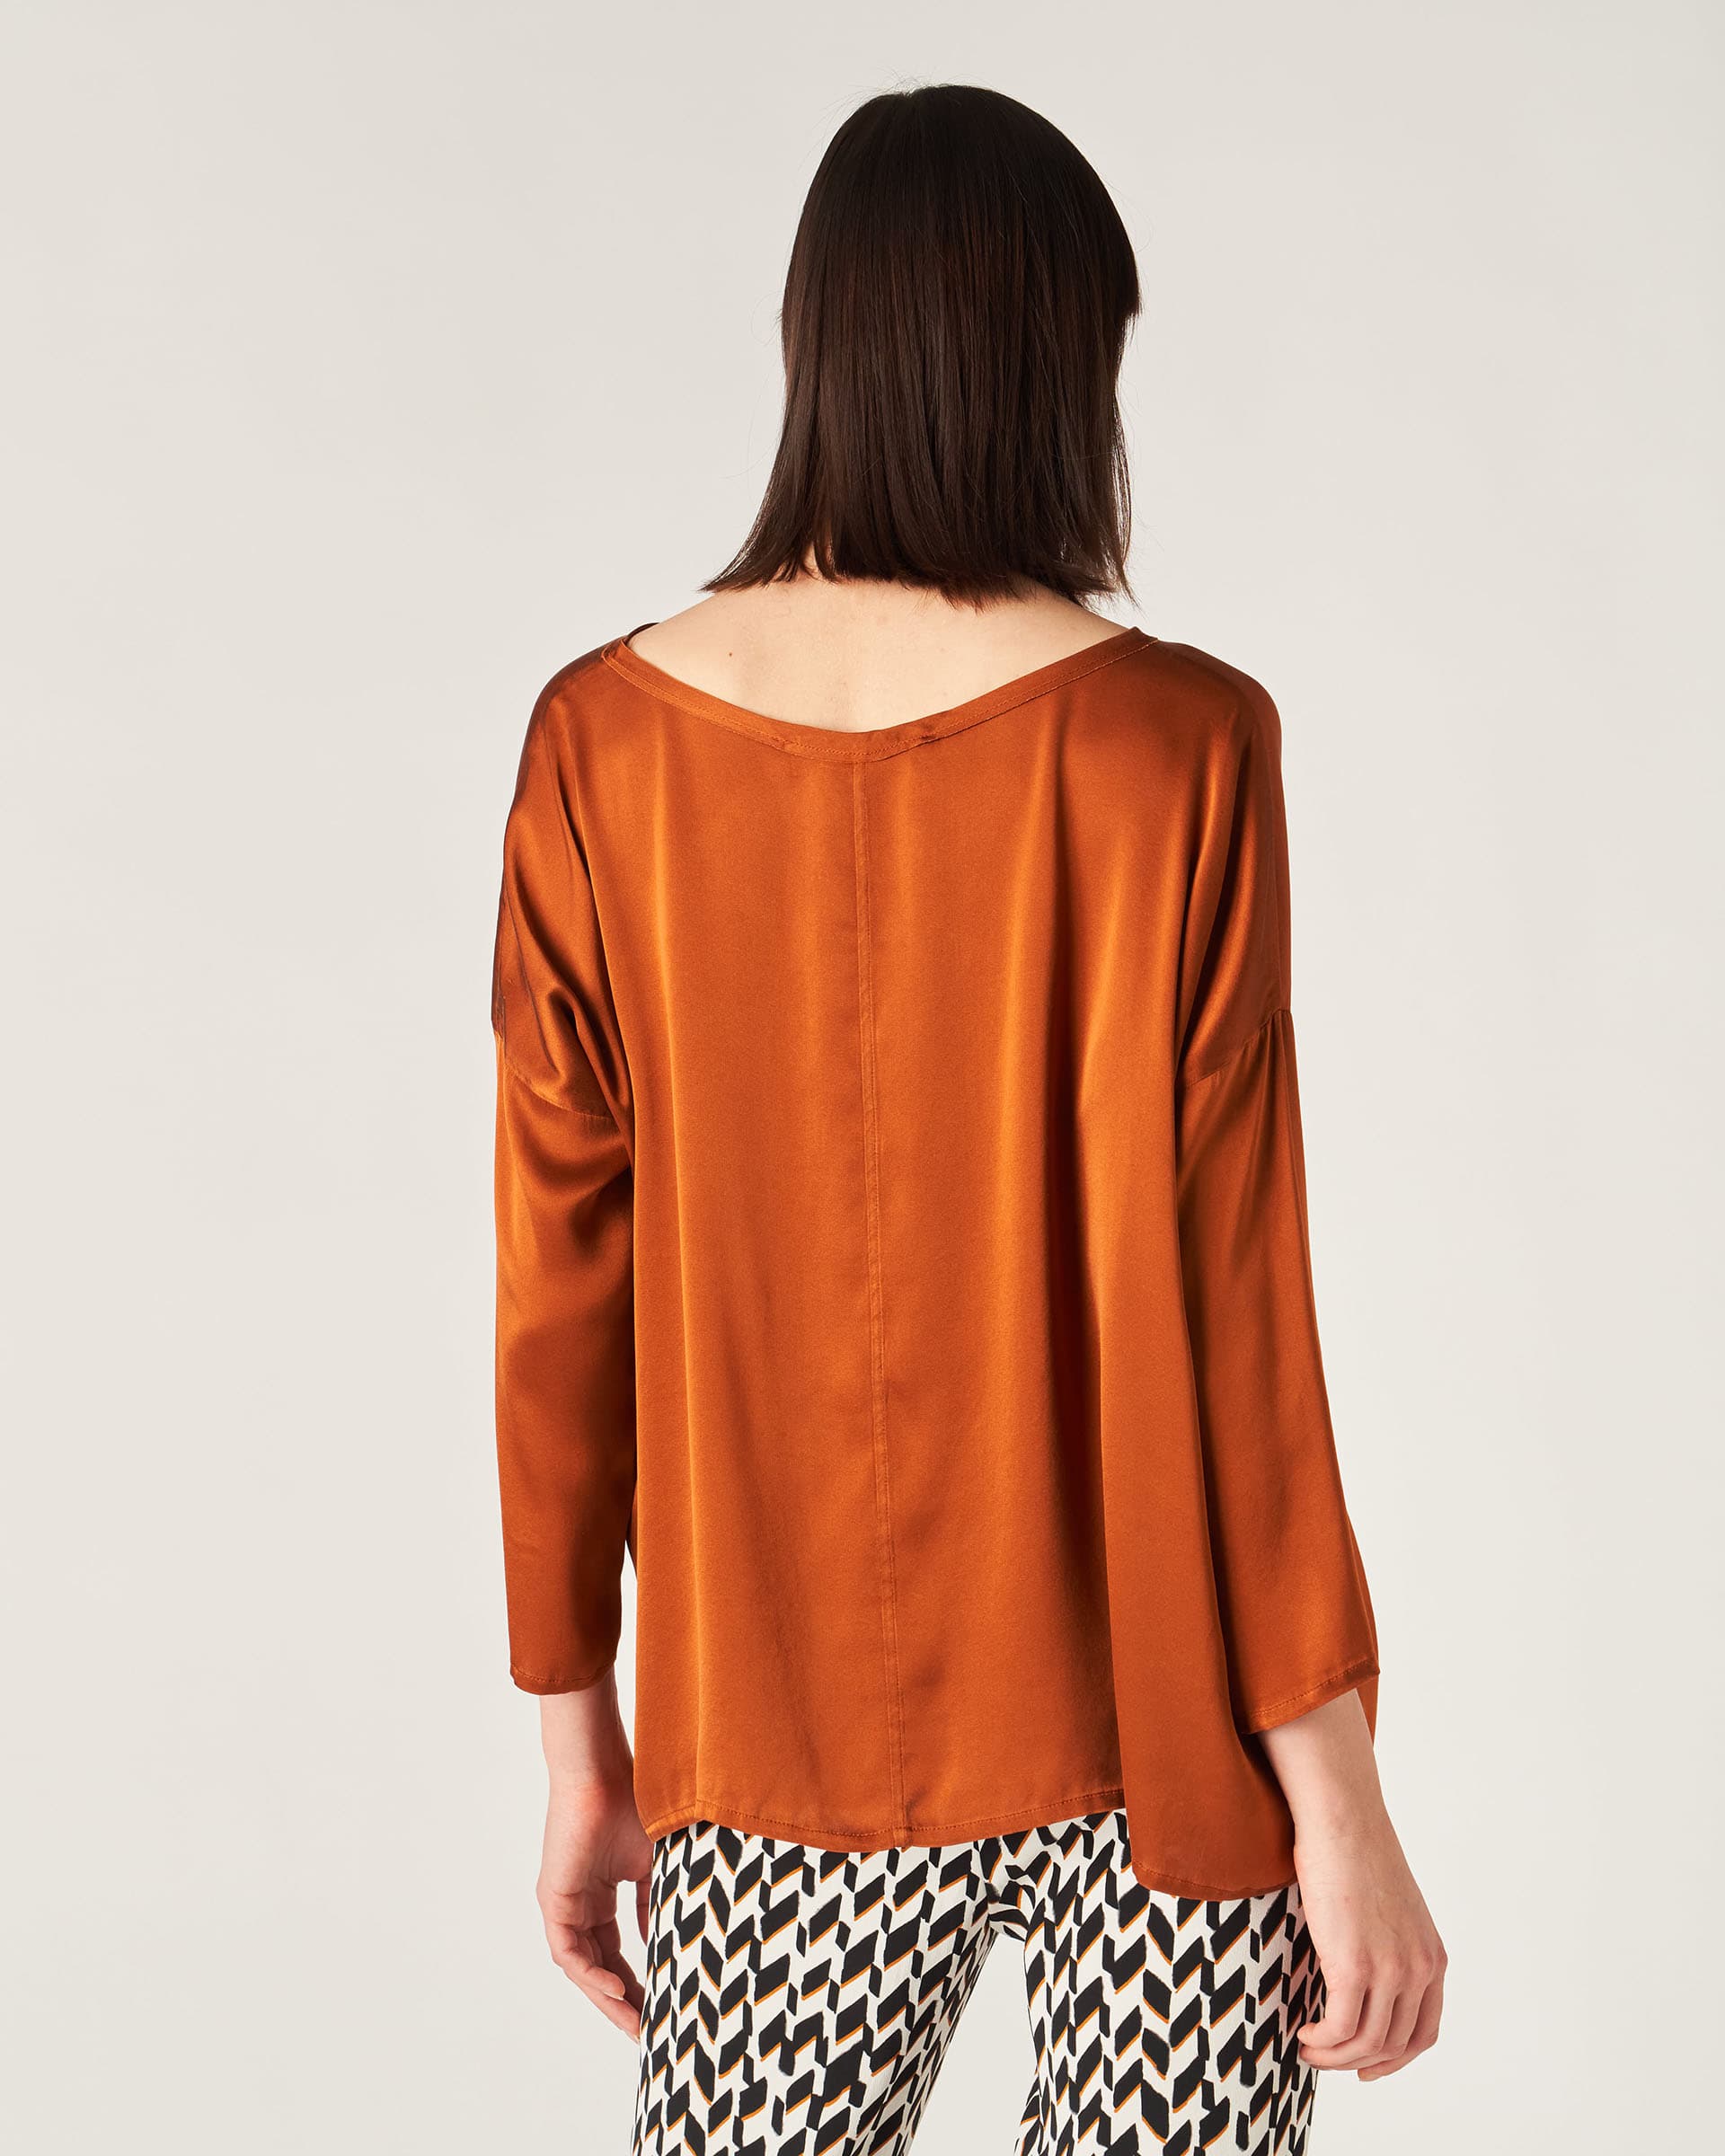 The Market Store | Satin Boxie Top